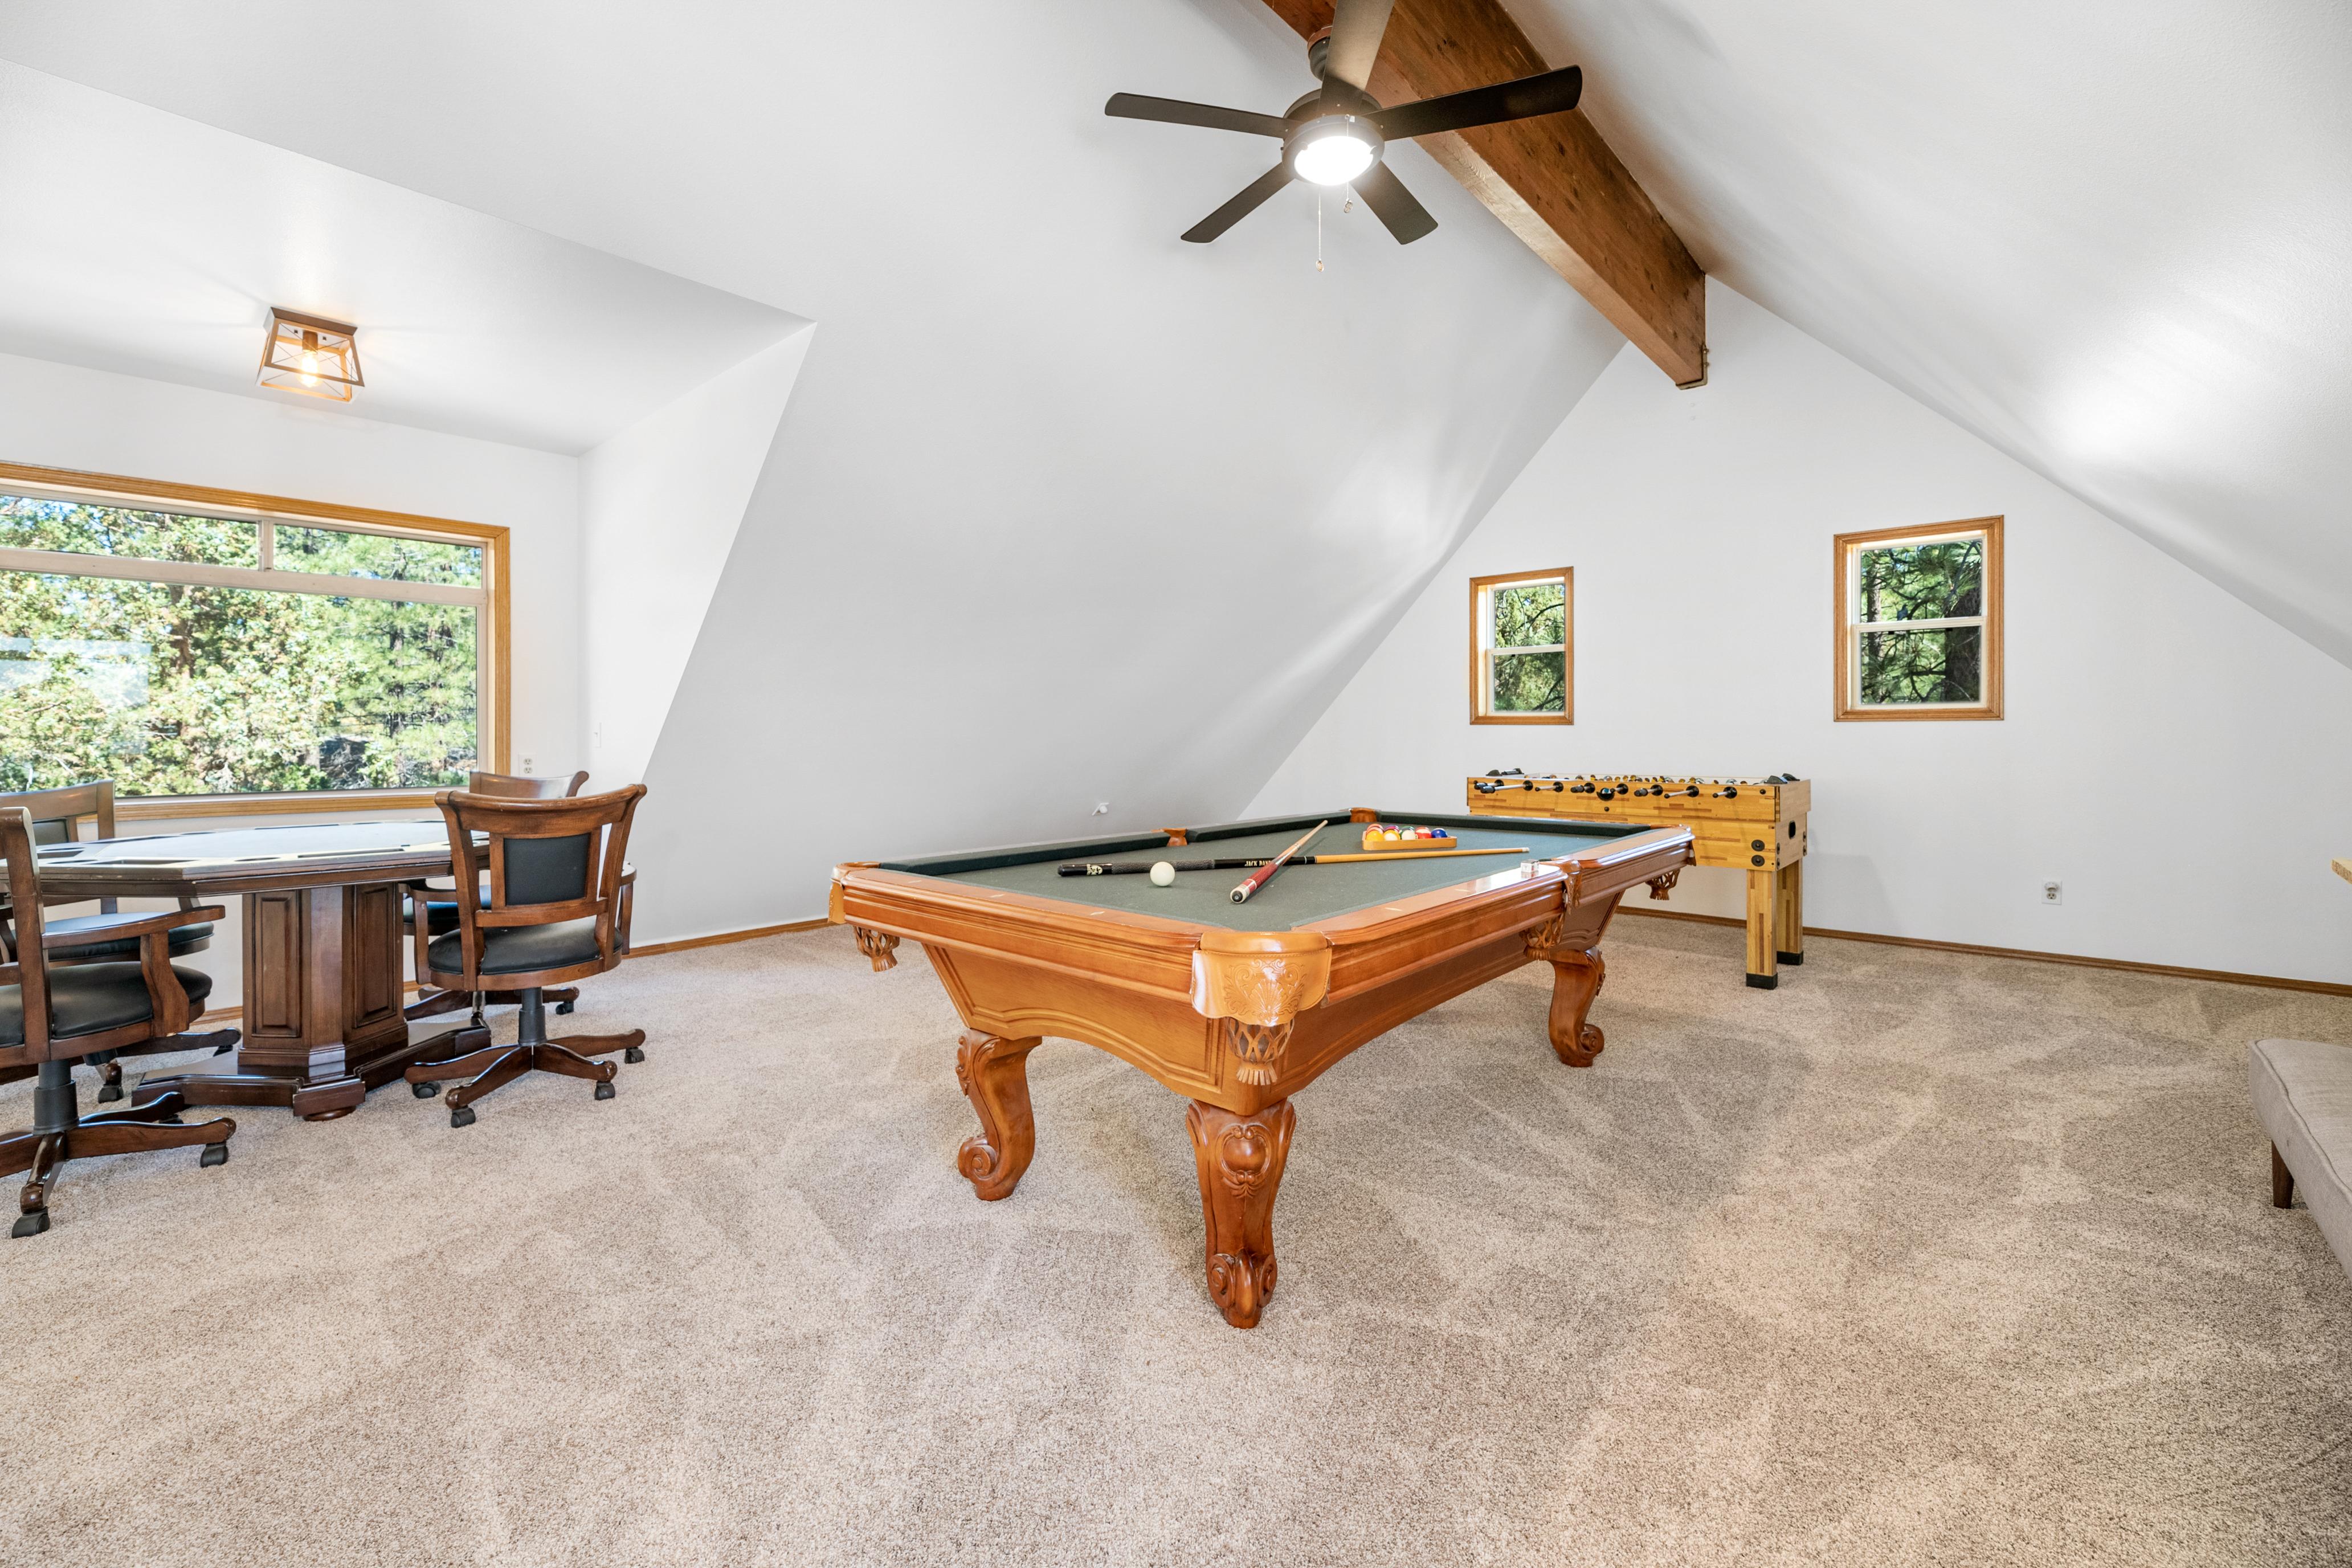 Third story loft Game Room with Pool Table, Foosball, Poker/Game Table, Bar, 65-inch 4k Smart TV, Fireplace and access to an elevated deck with picturesque views of the lake and slopes.  
